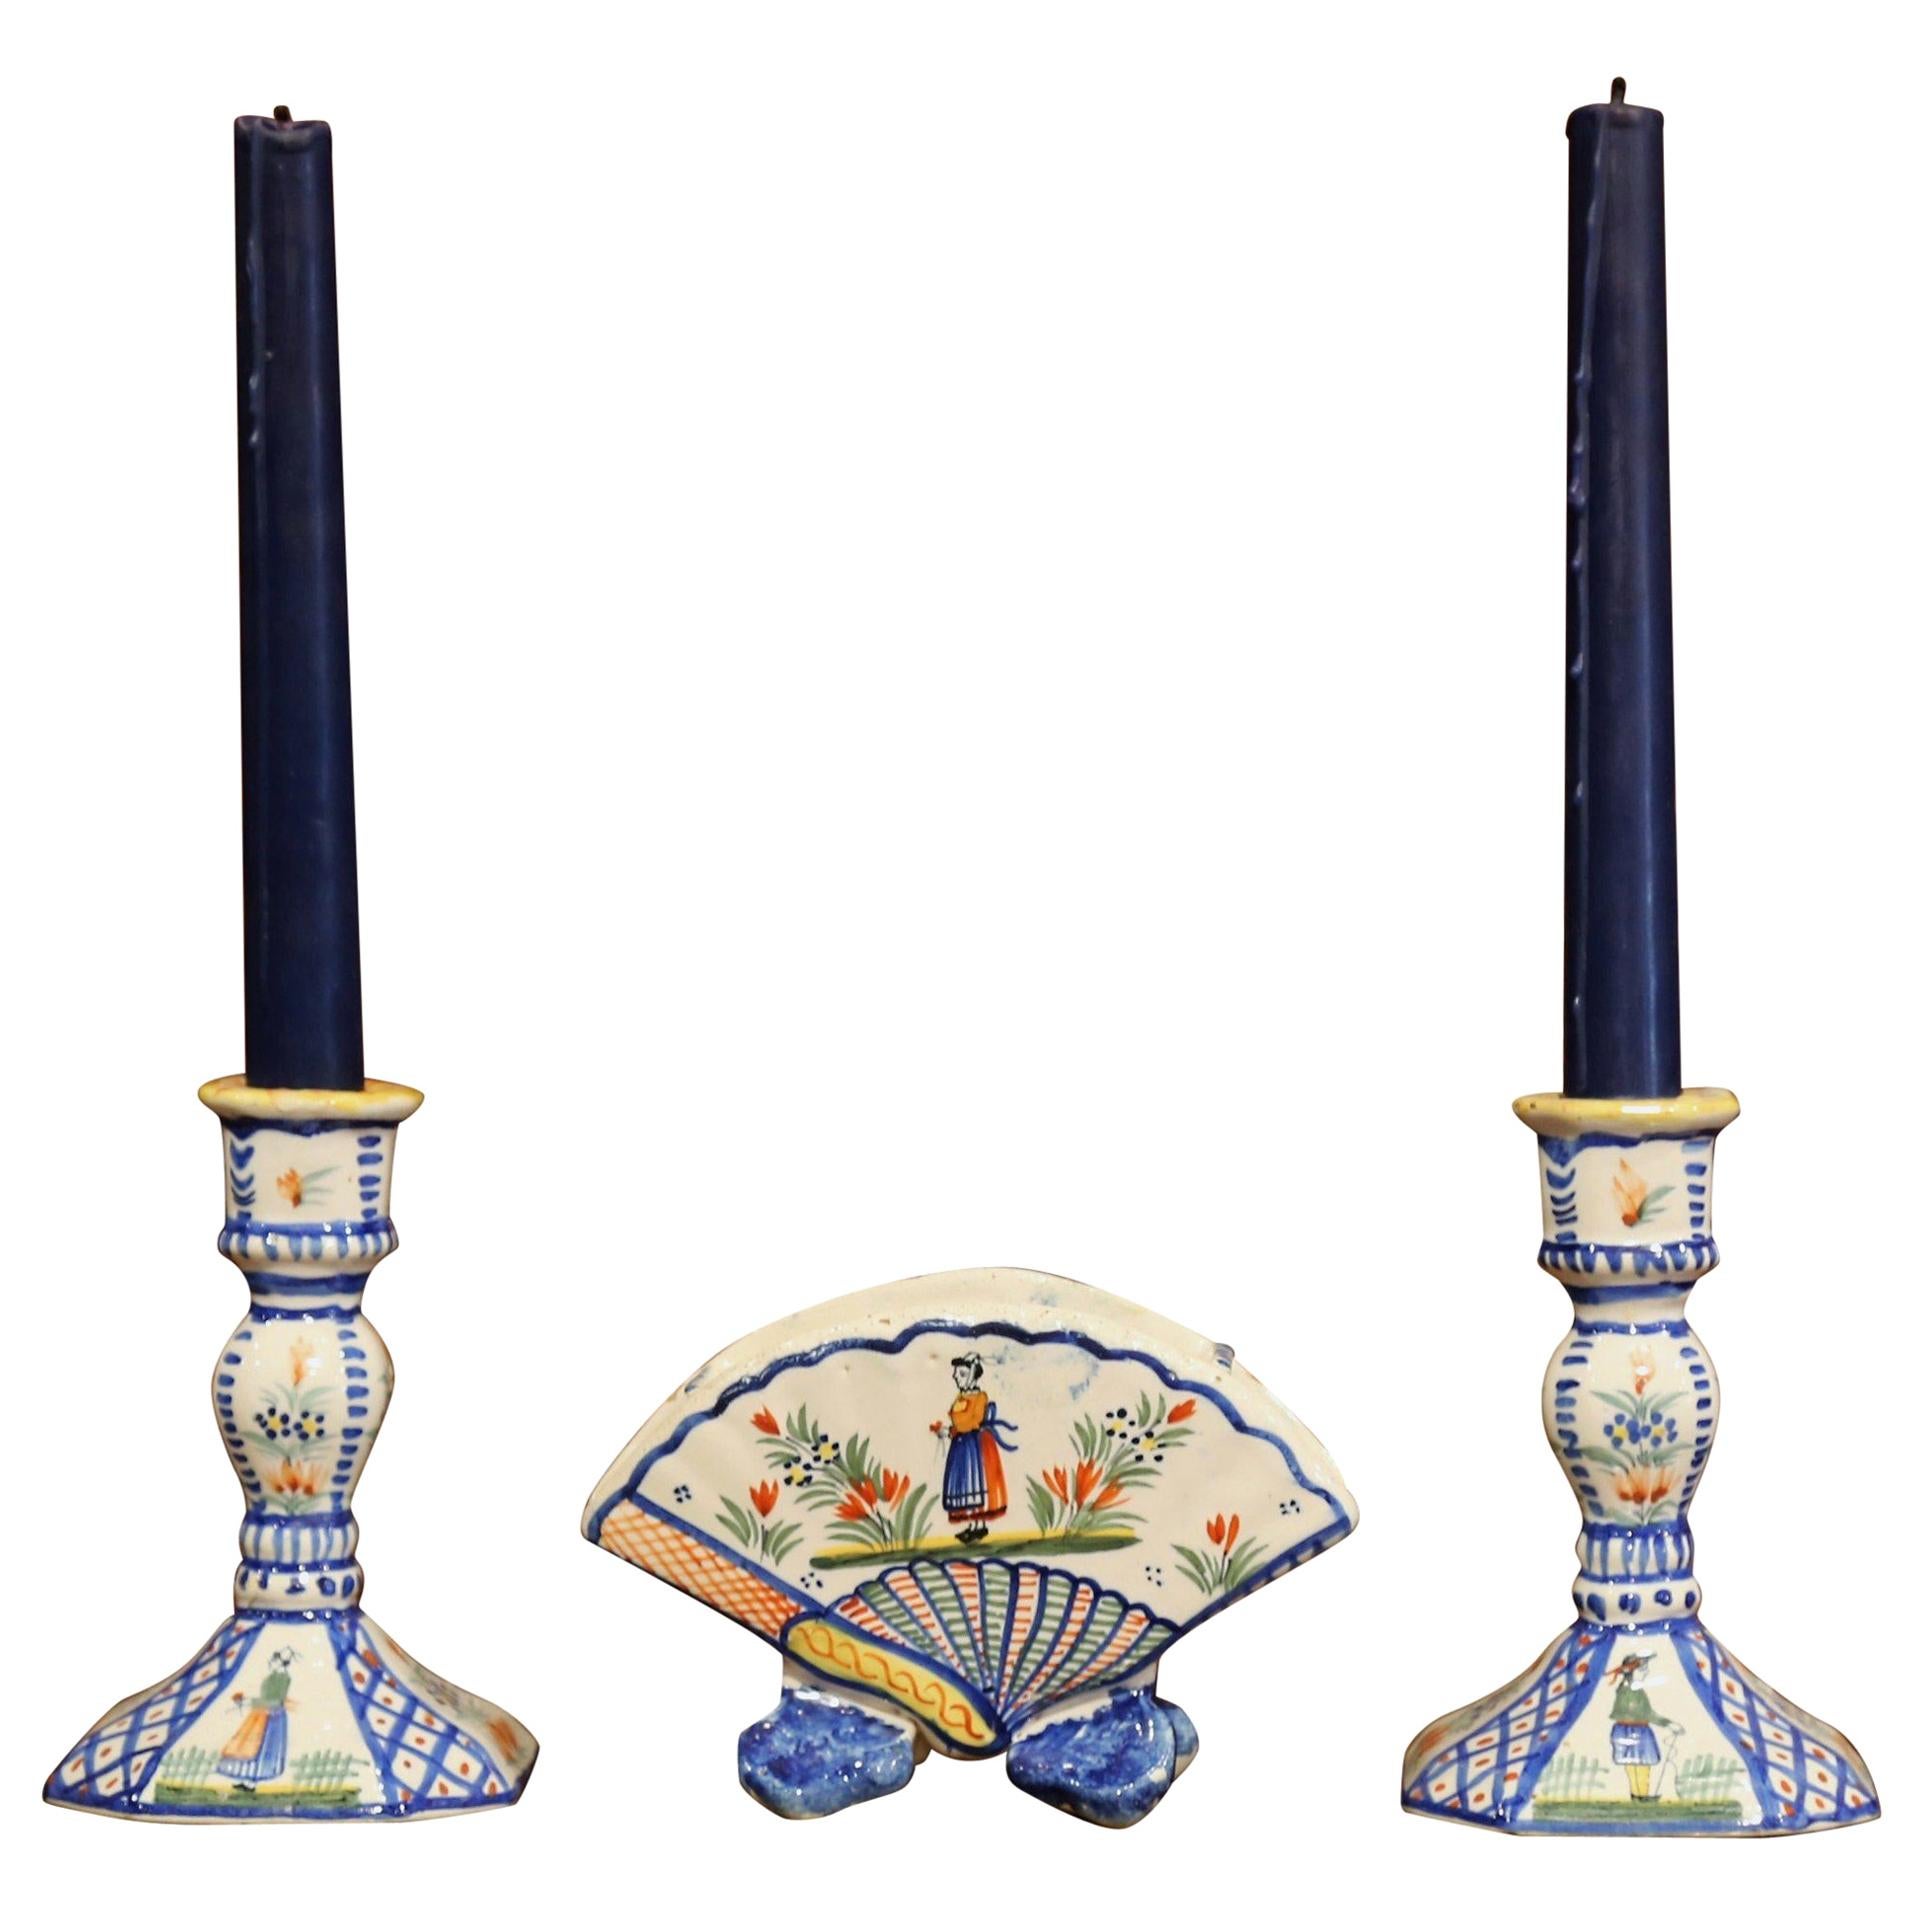 20th Century French Faience Pair of Candlesticks with Vase from Henriot Quimper